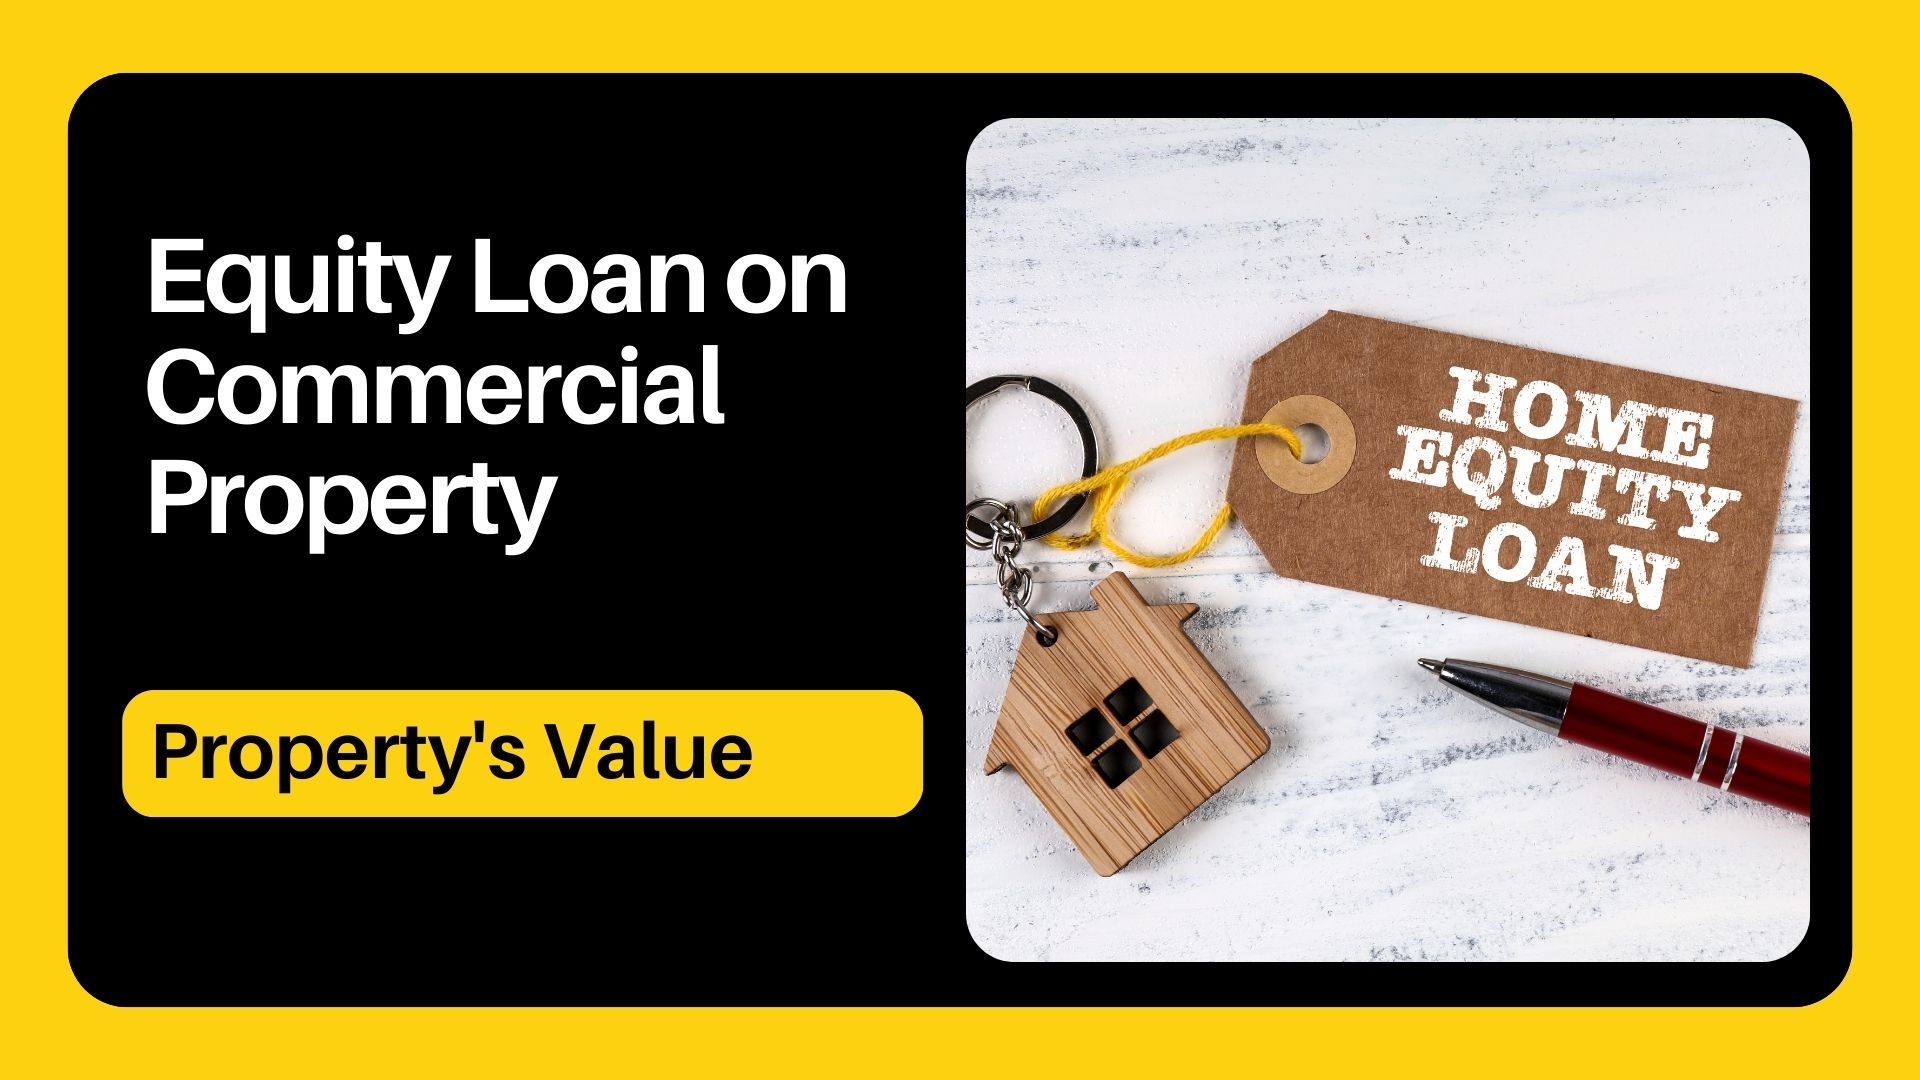 Equity Loan on Commercial Property